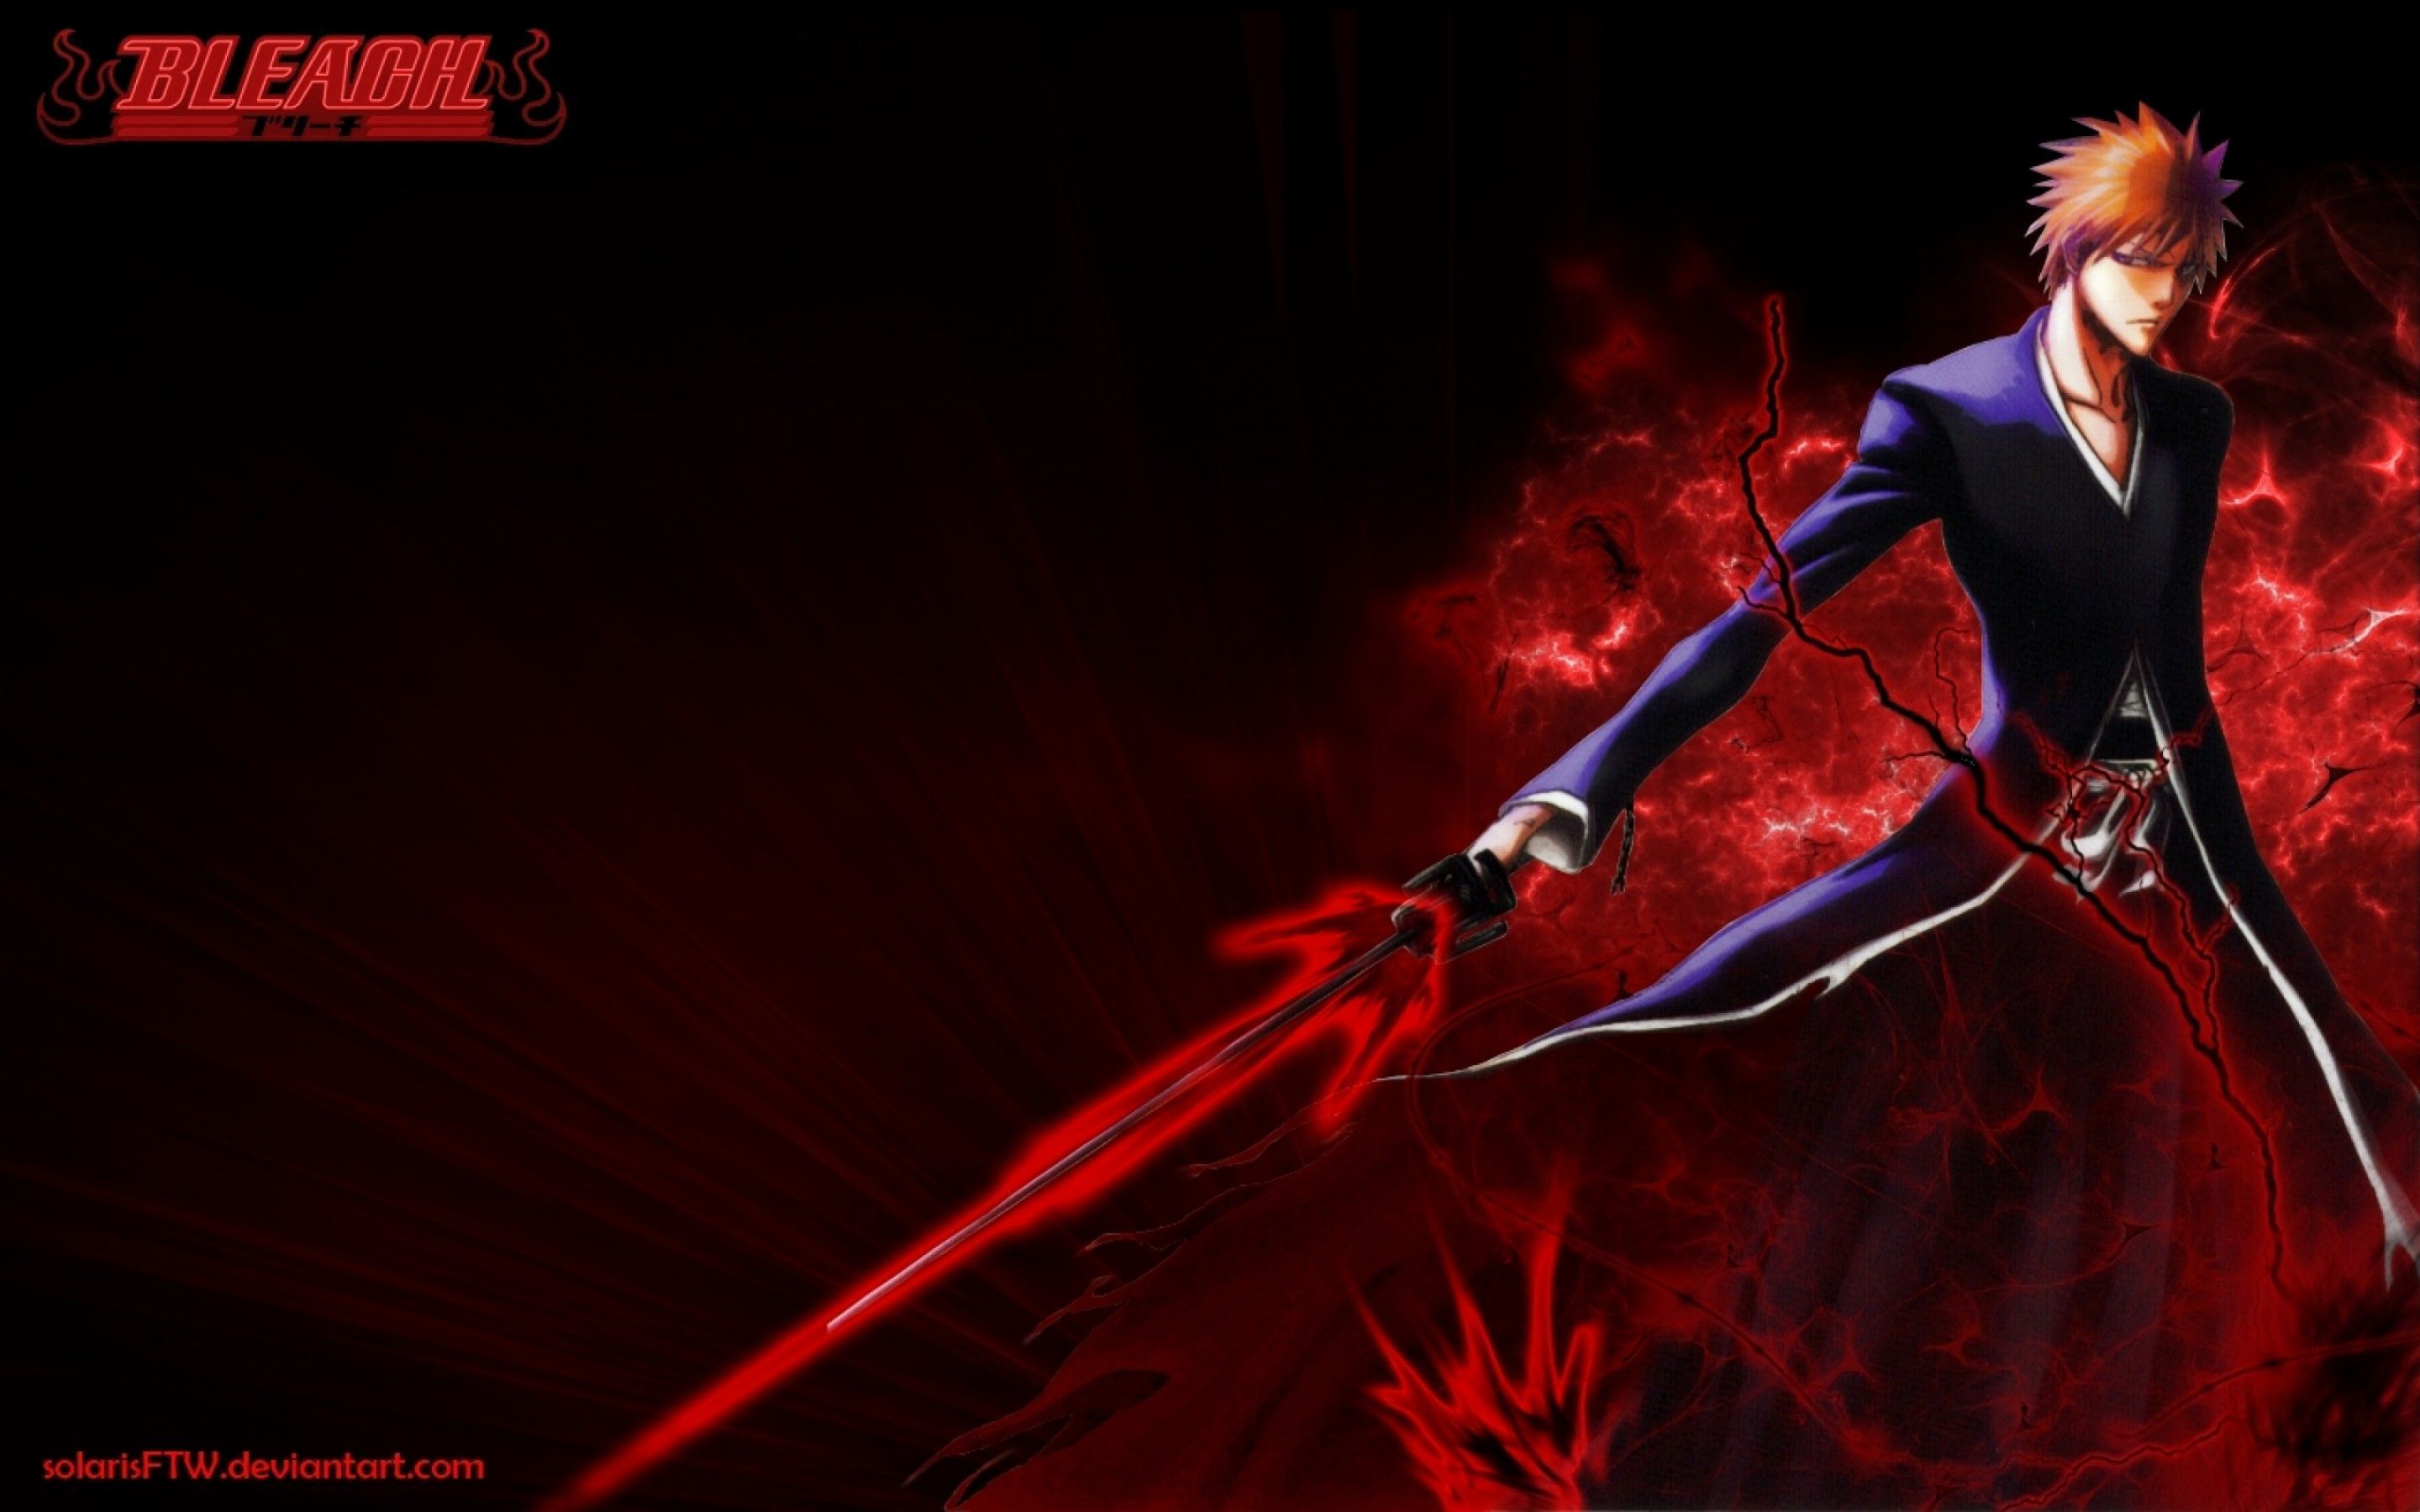 Red Anime Pc Wallpapers Wallpaper Cave